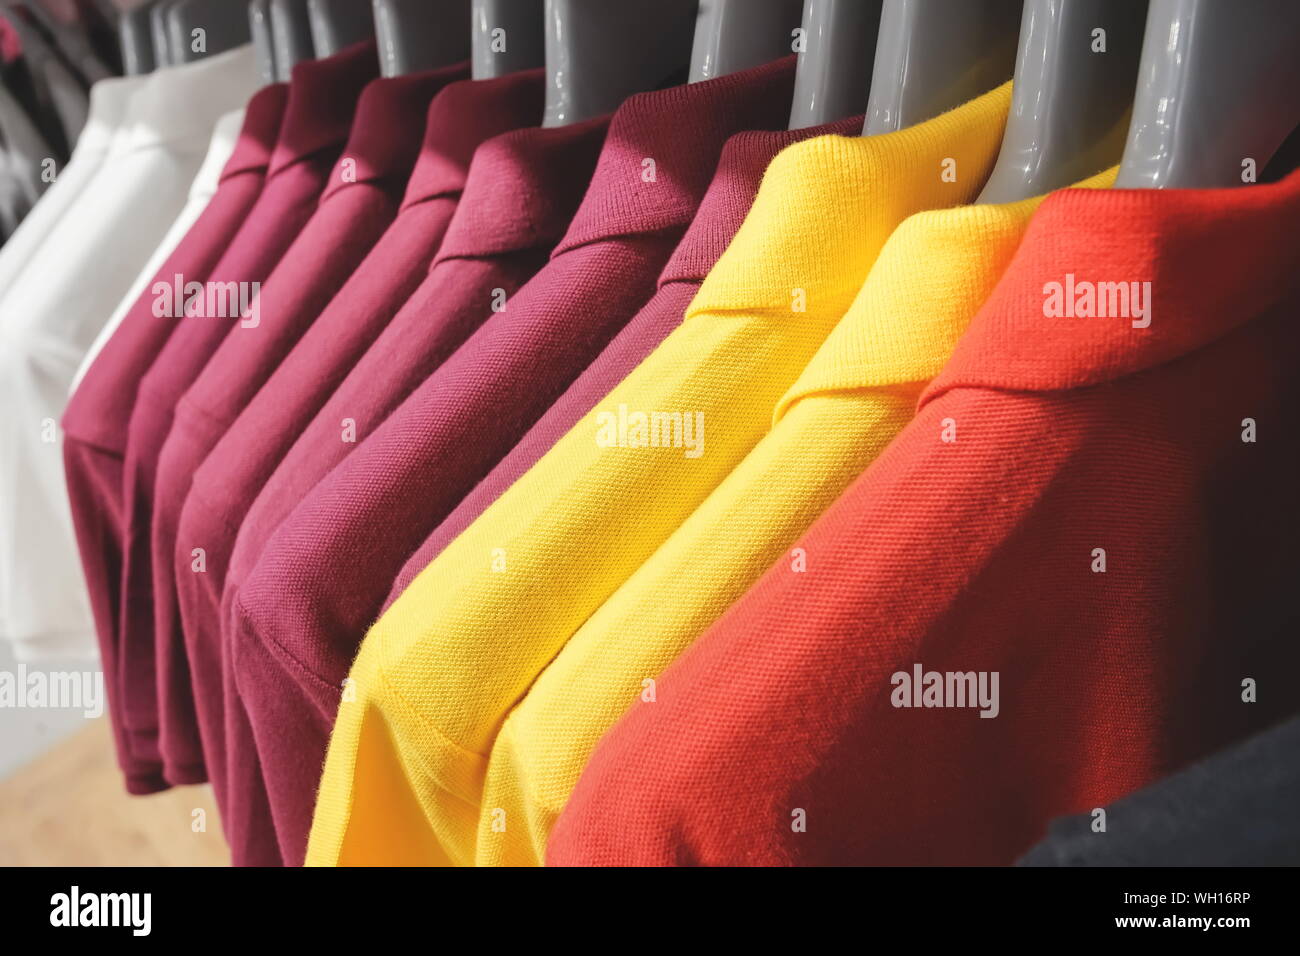 Closed up hanging red, yellow, dark purple and white polo shirts. Stock Photo